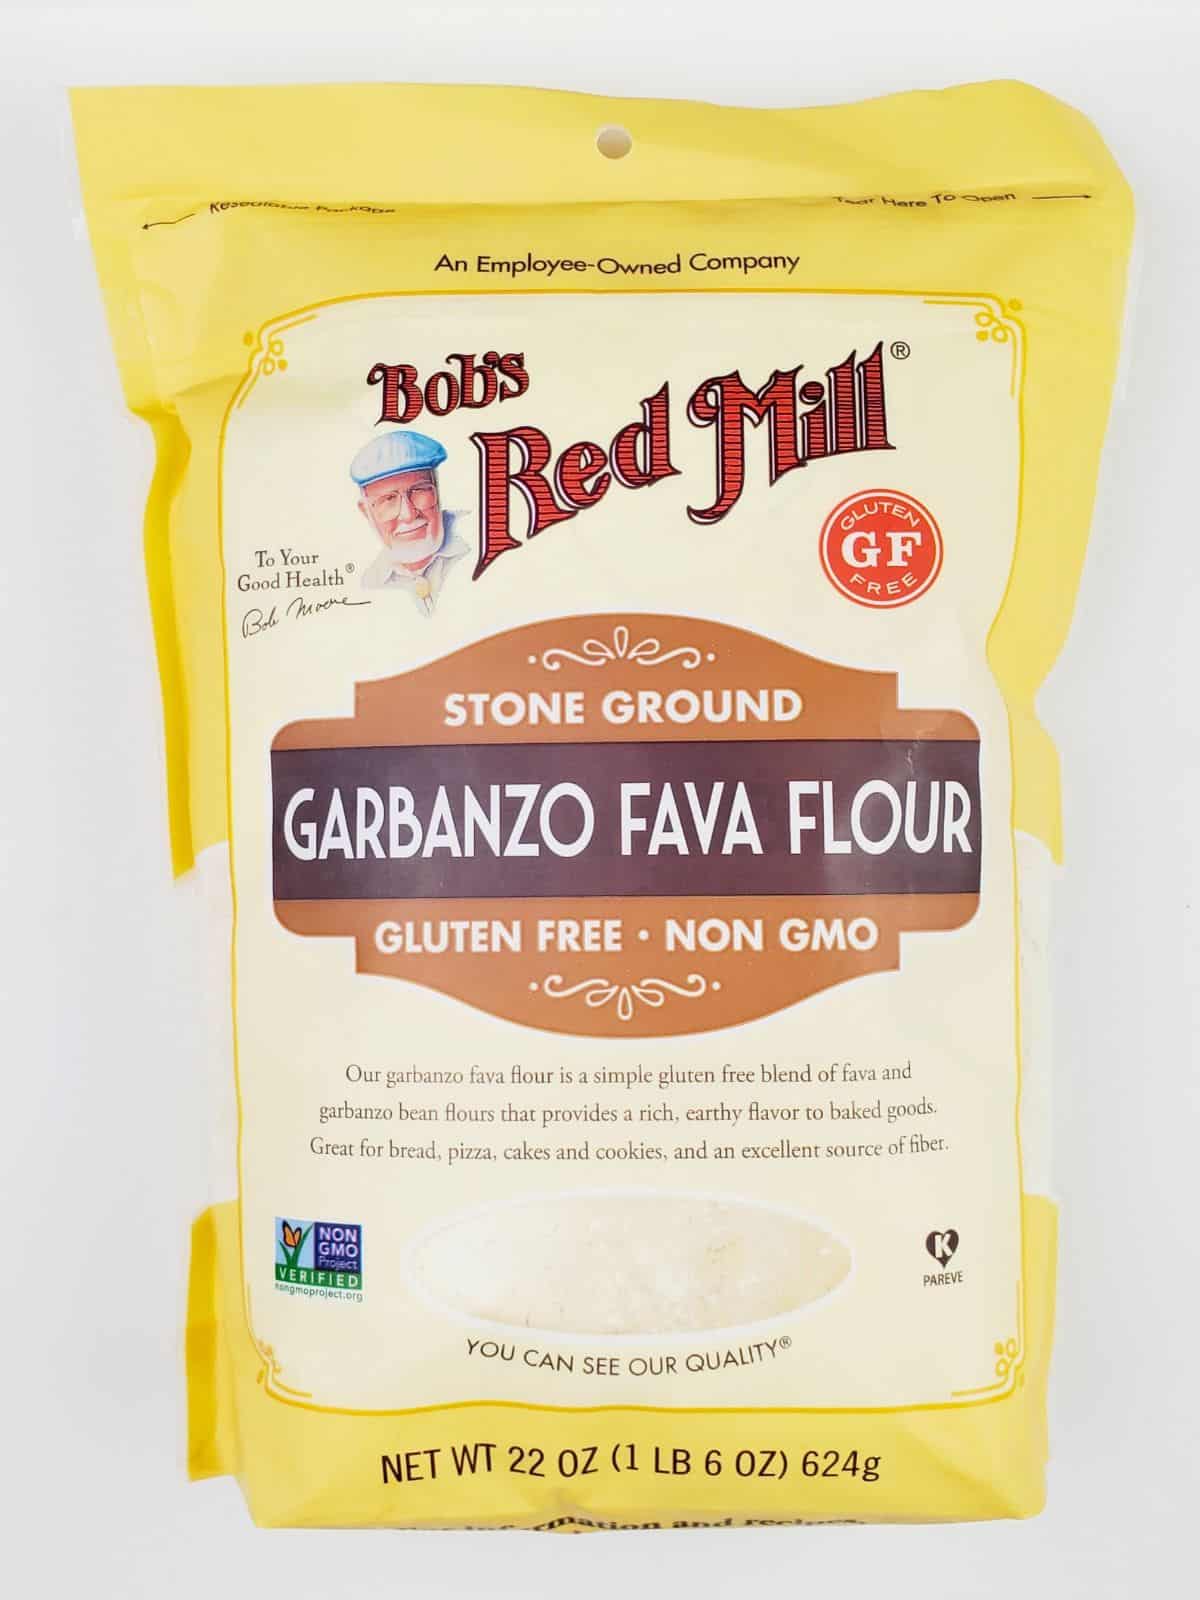 a pack of 22 oz. of garbanzo fava flour from Bob's Red Mill.